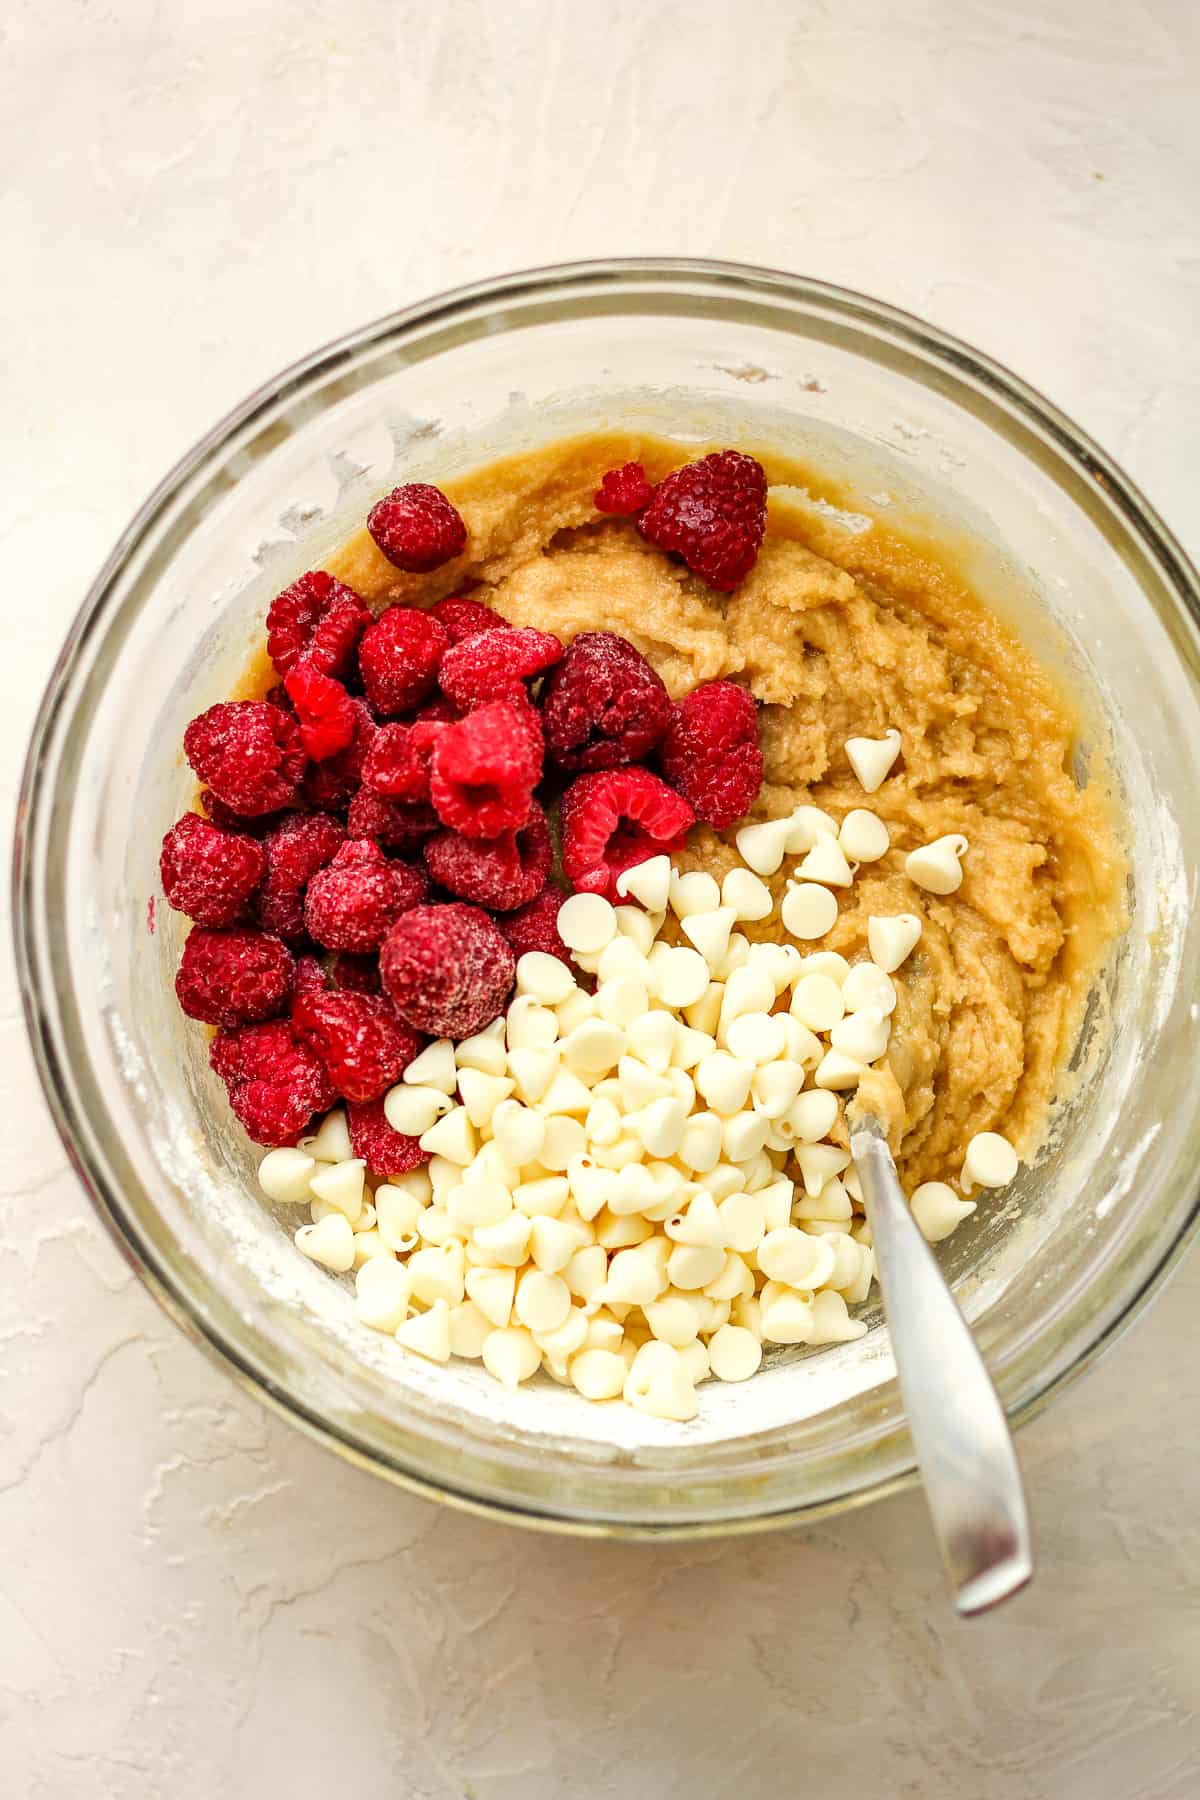 A bowl of the batter plus white chocolate chips and frozen raspberries.